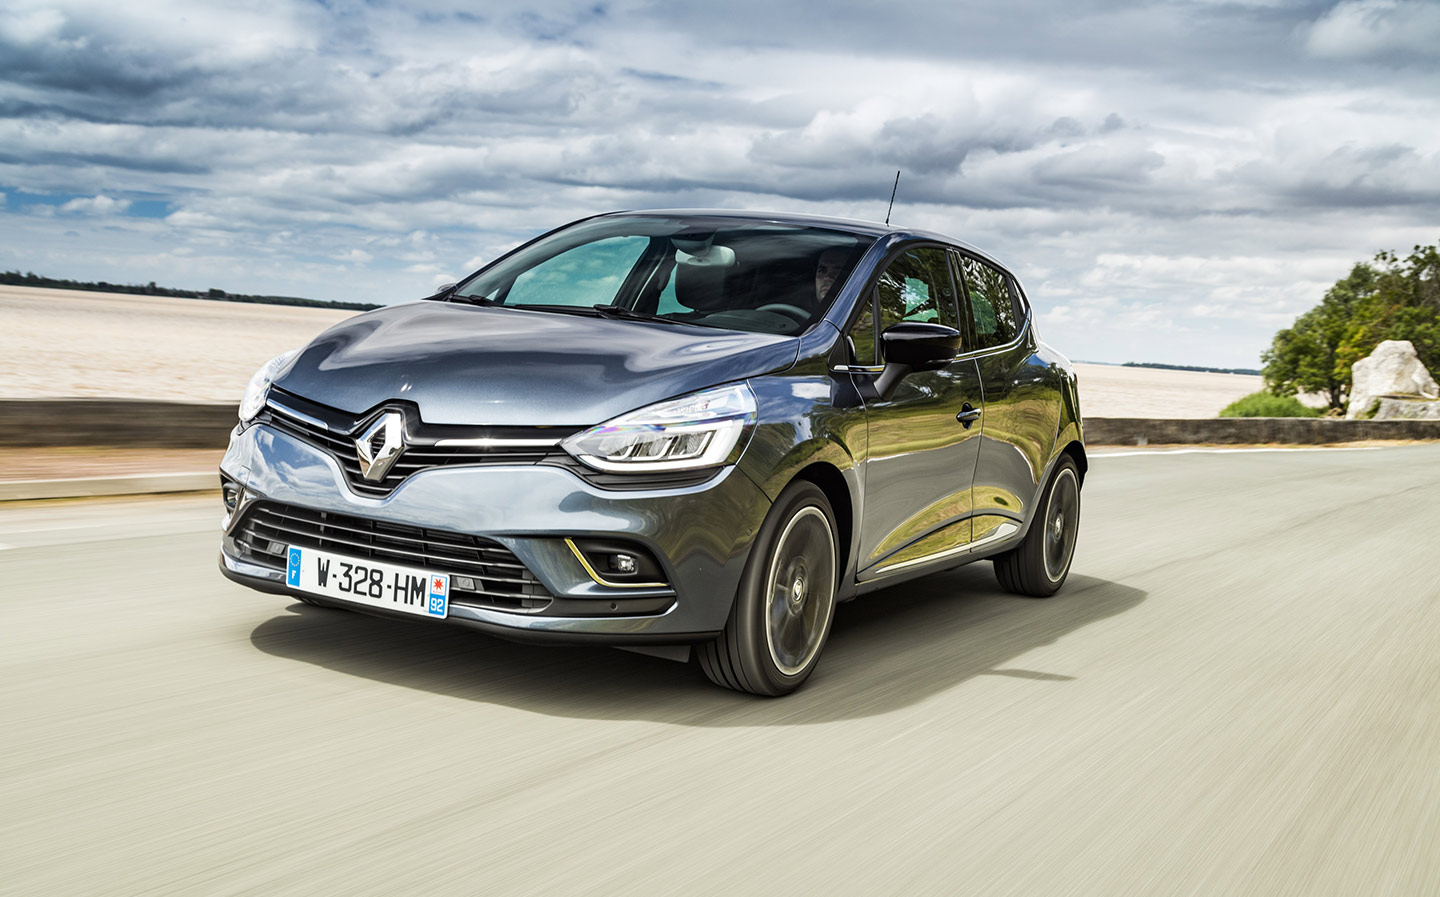 https://www.driving.co.uk/wp-content/uploads/sites/5/2019/02/clio-03.jpg